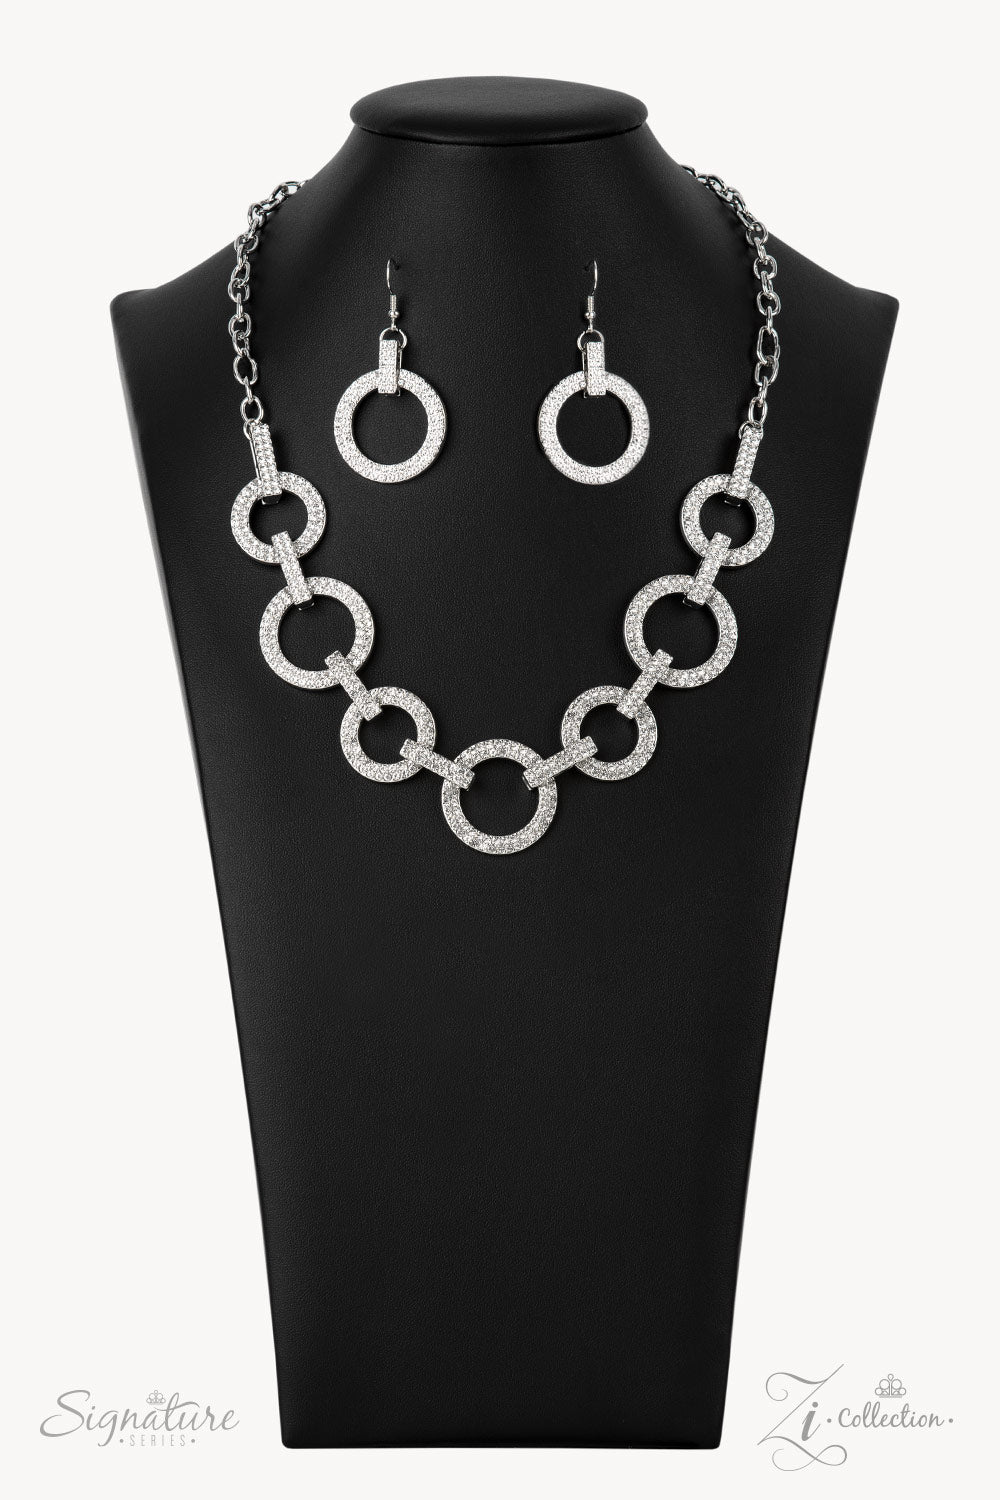 The Missy 2021 Signature ZI necklace